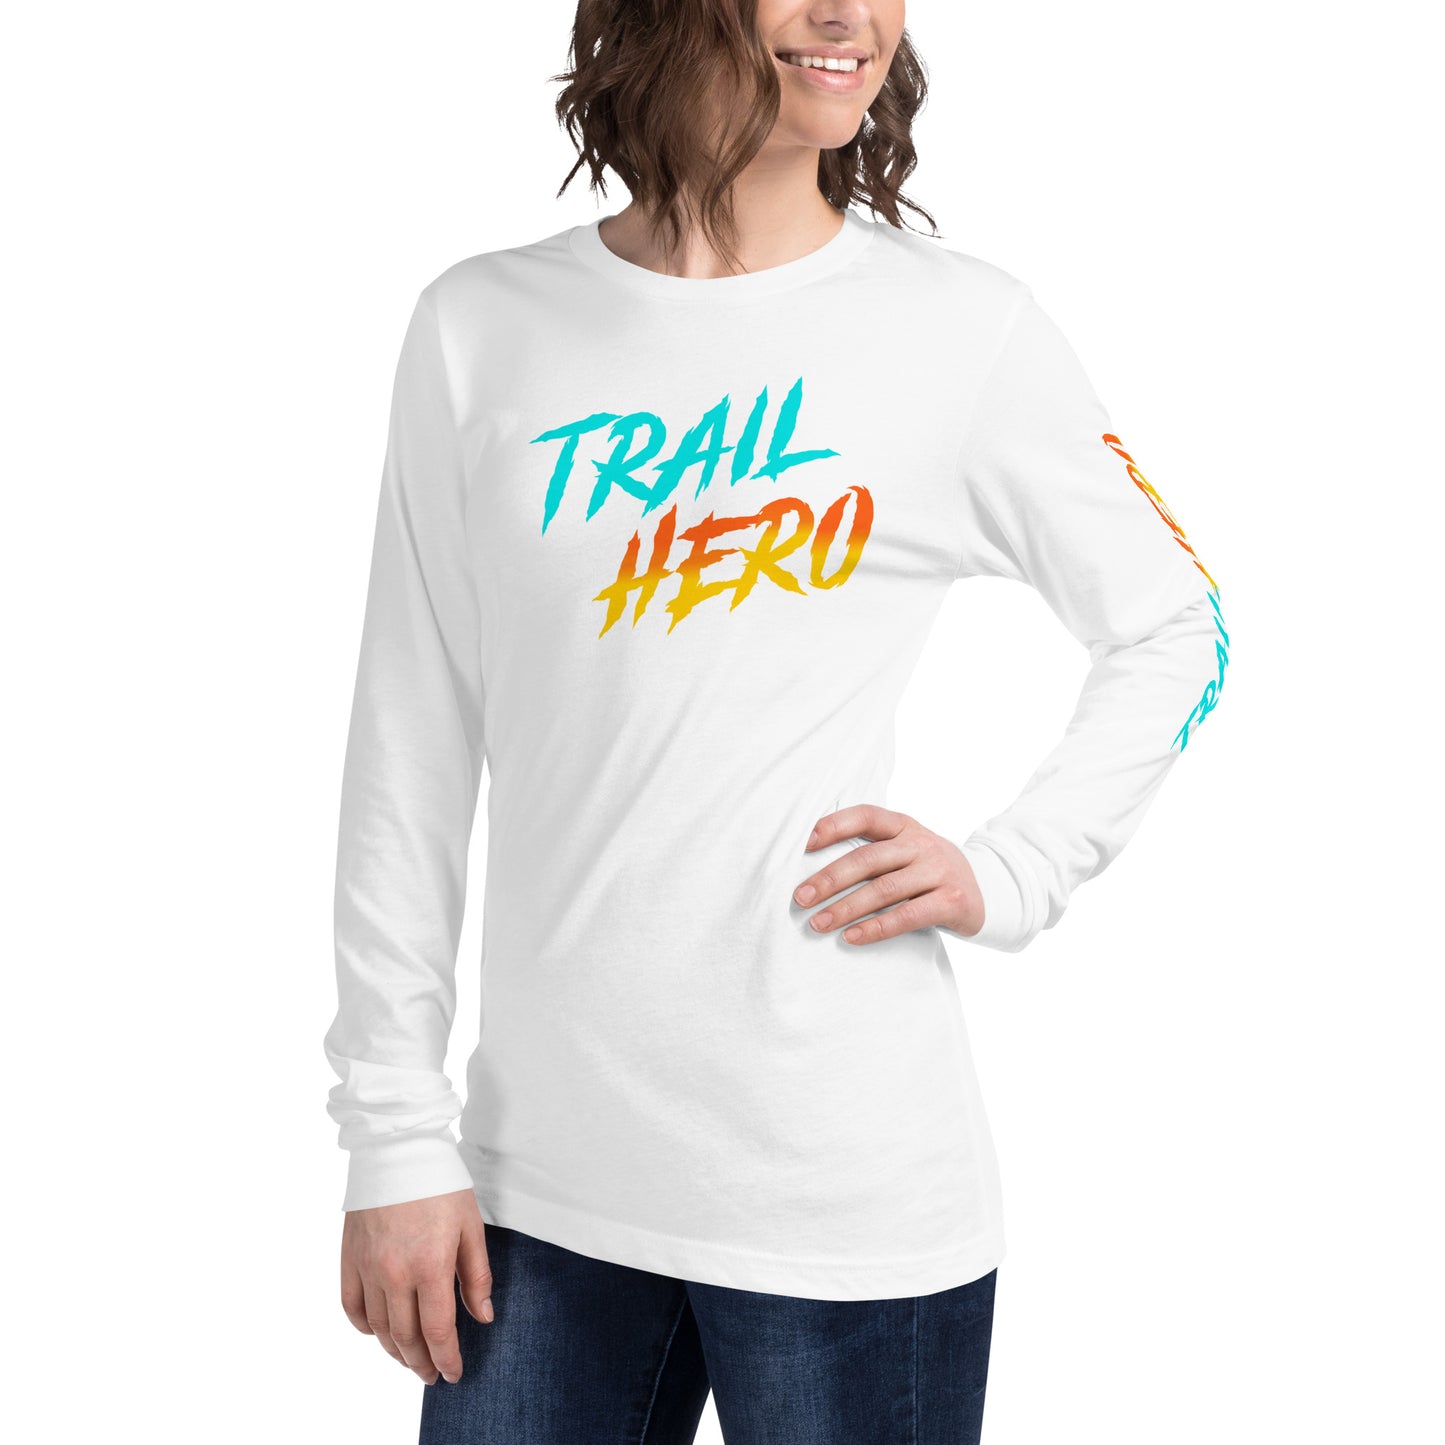 Trail Hero - Unisex - 100% Cotton Long Sleeve Tee - 80s Throw Back - 8 Colors